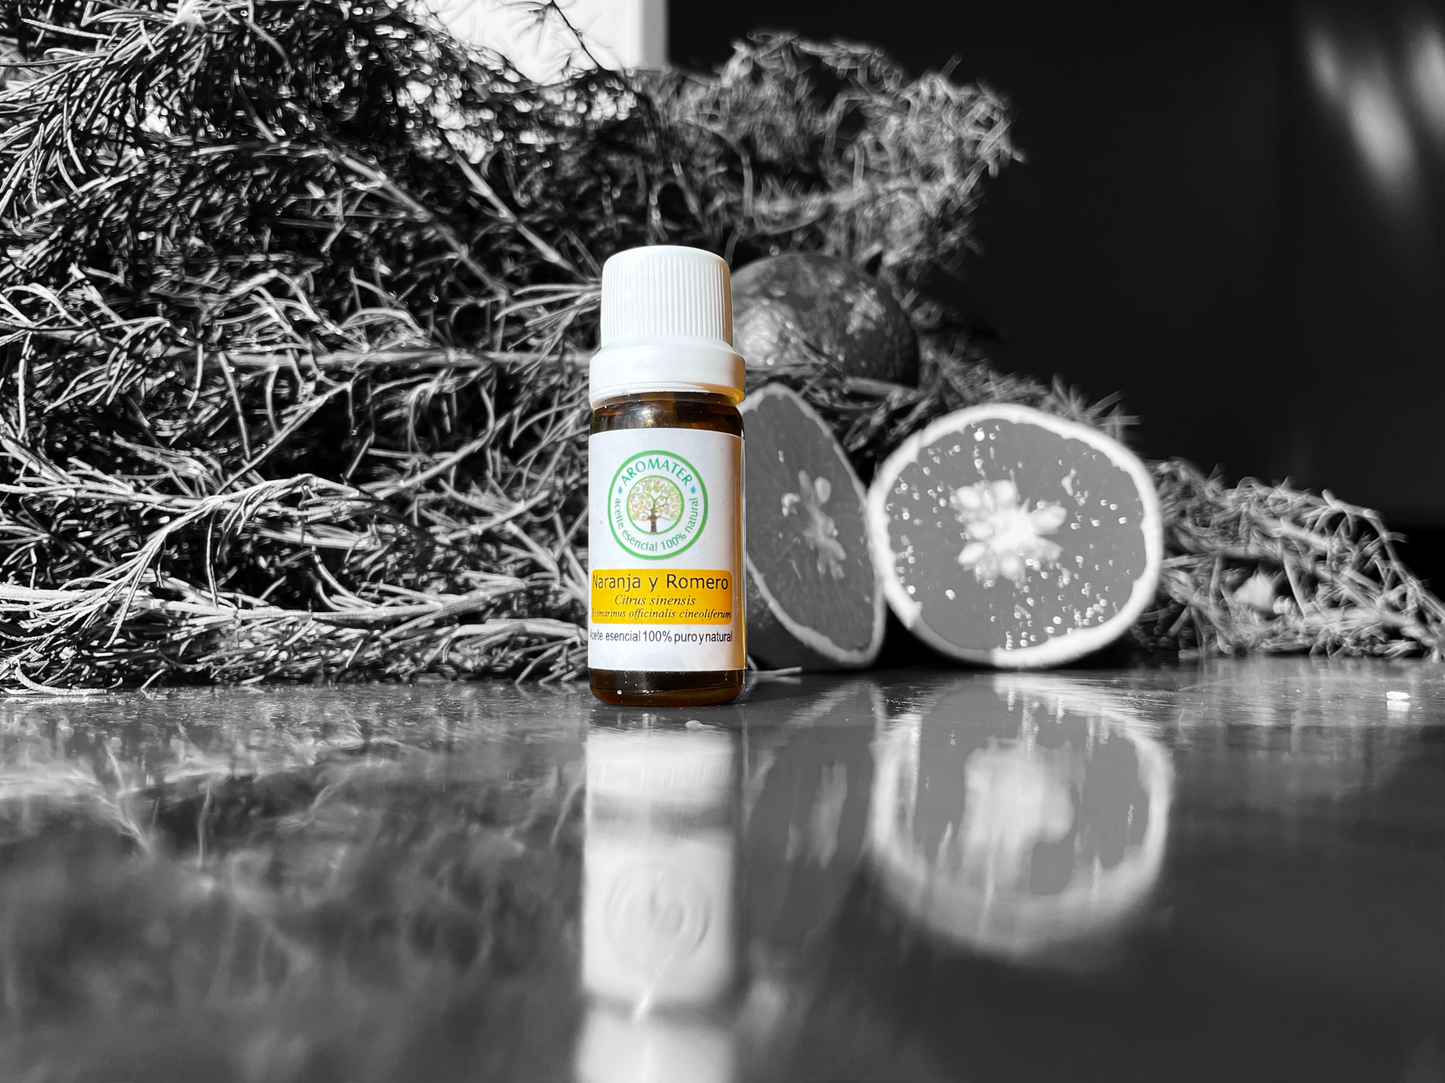 ORANGE AND ROSEMARY ESSENTIAL OIL Qt CINEOL: Physical and emotional toning mixture